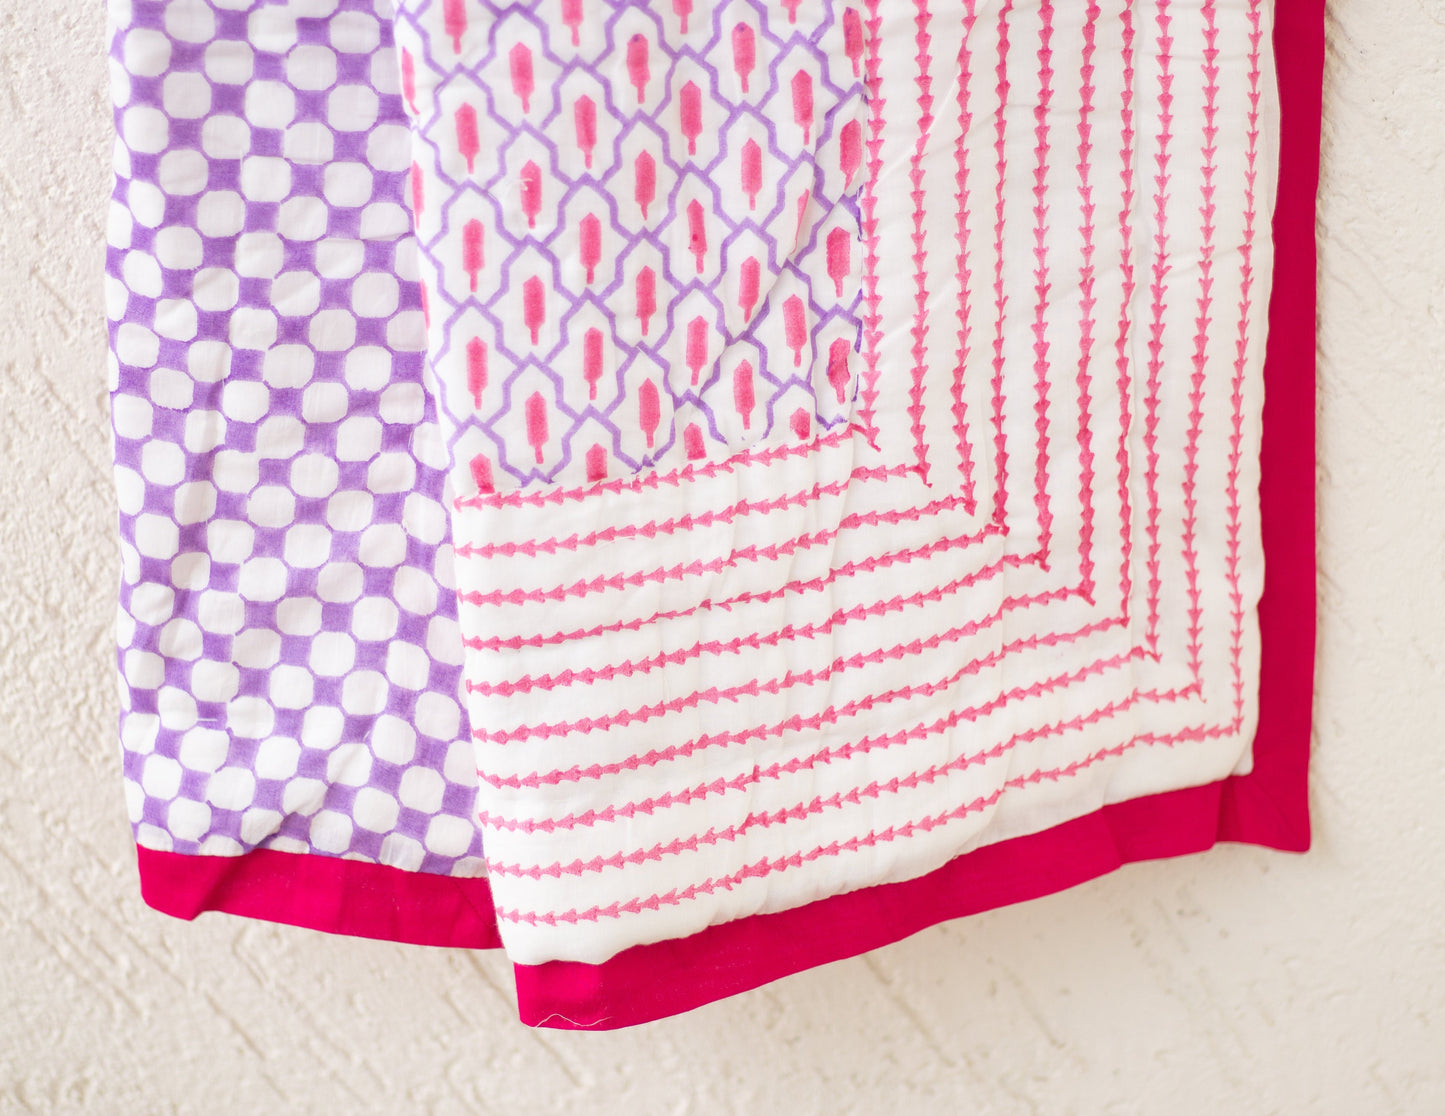 Geometric baby quilt -  Purple and Pink quilt - Baby size - 36x48 inches